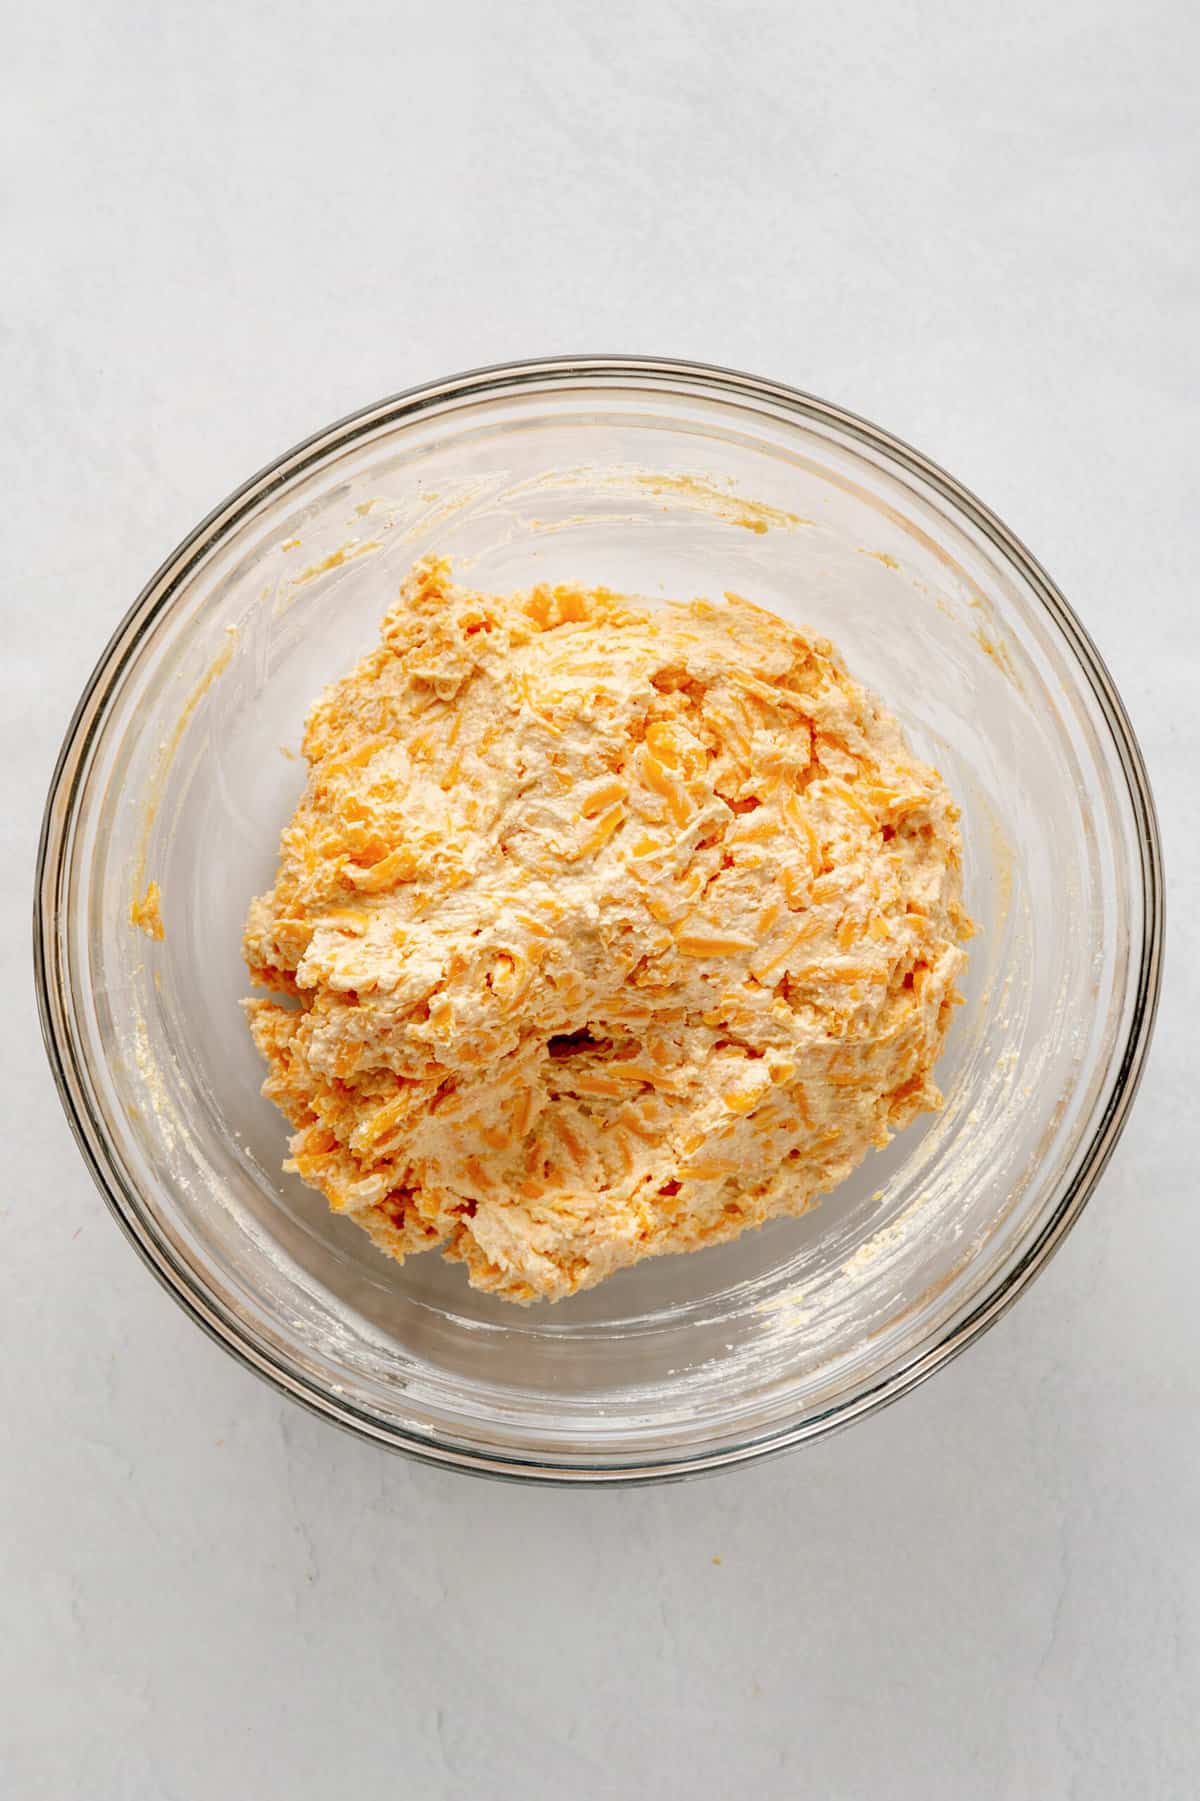 shredded cheddar cheese, mayo, cream cheese, seasonings in a large glass bowl